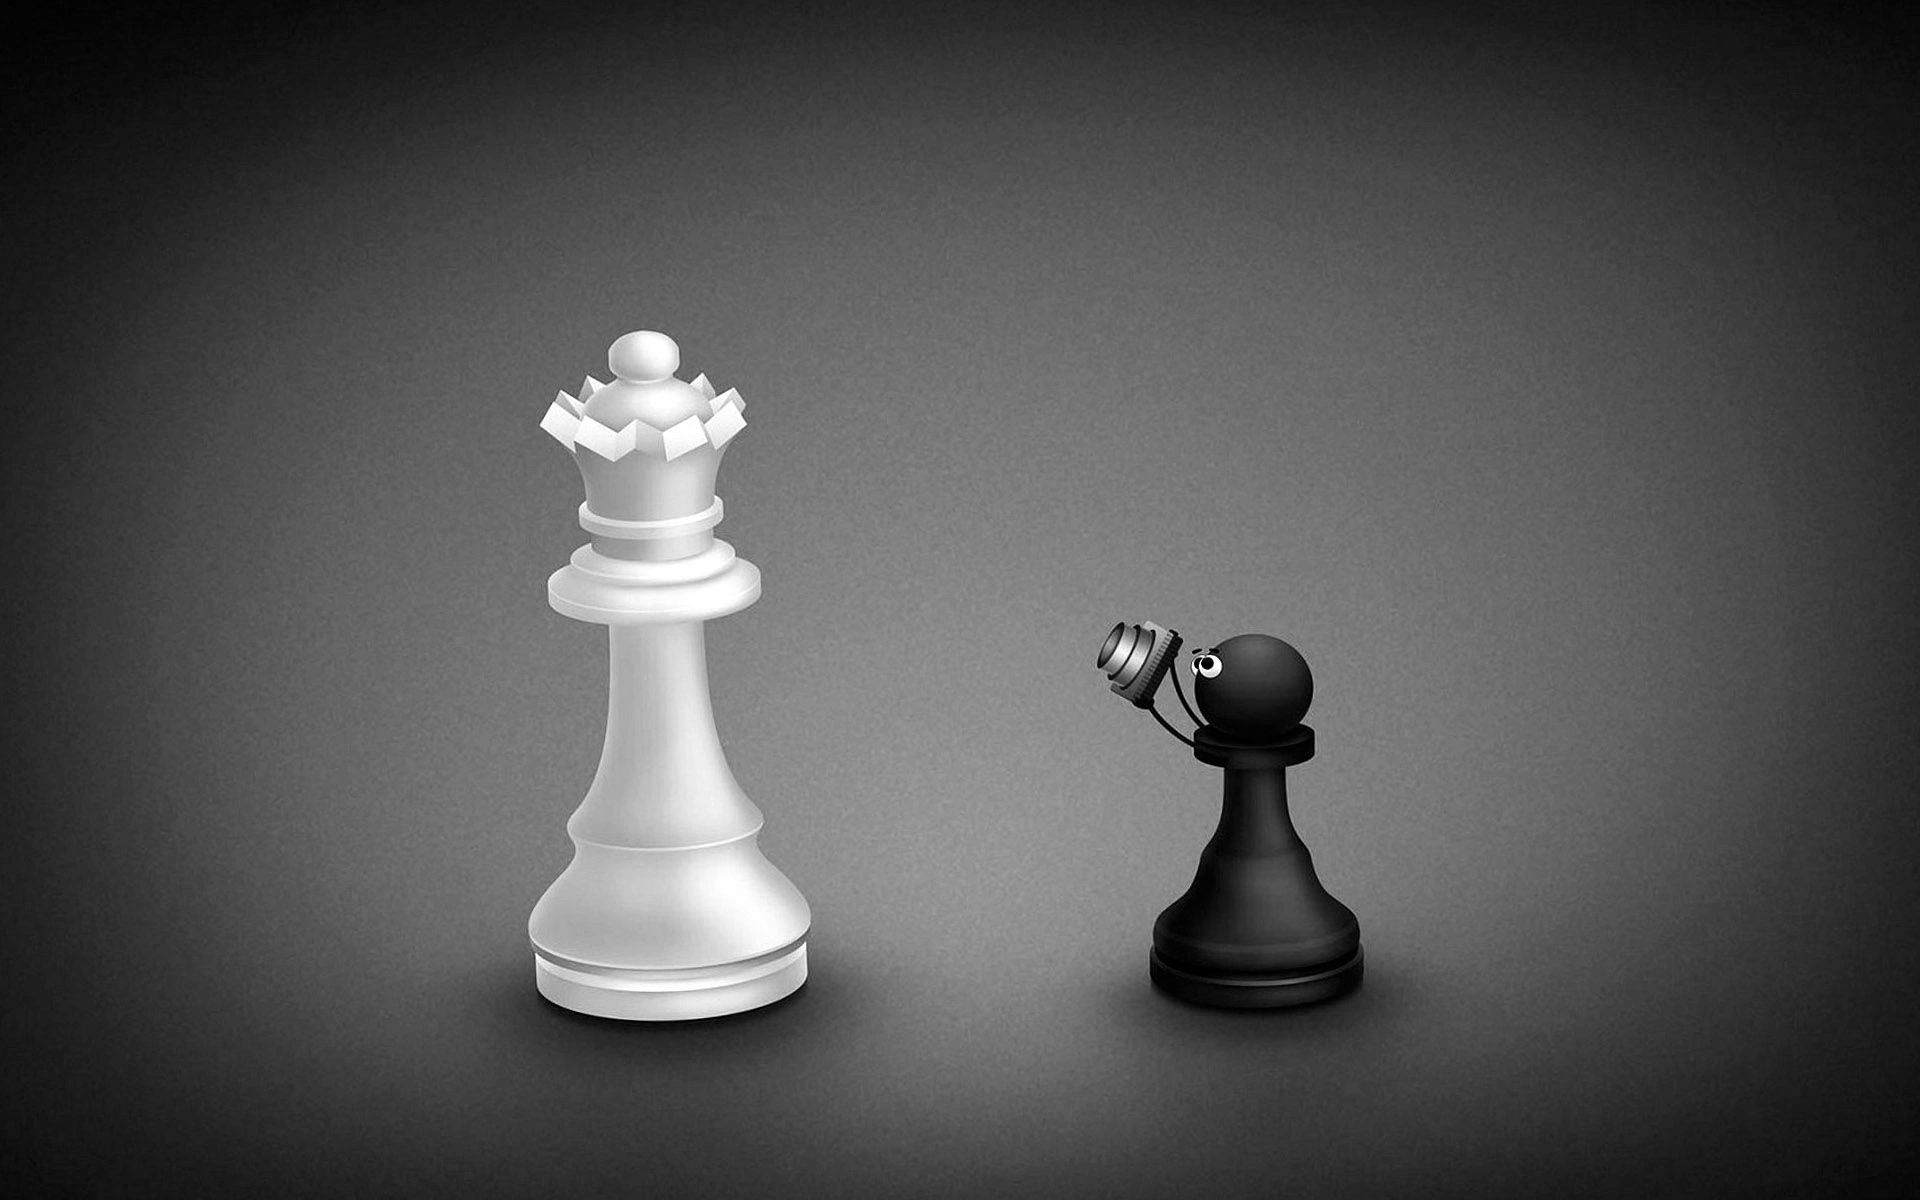 100+] Black And White Chess Wallpapers